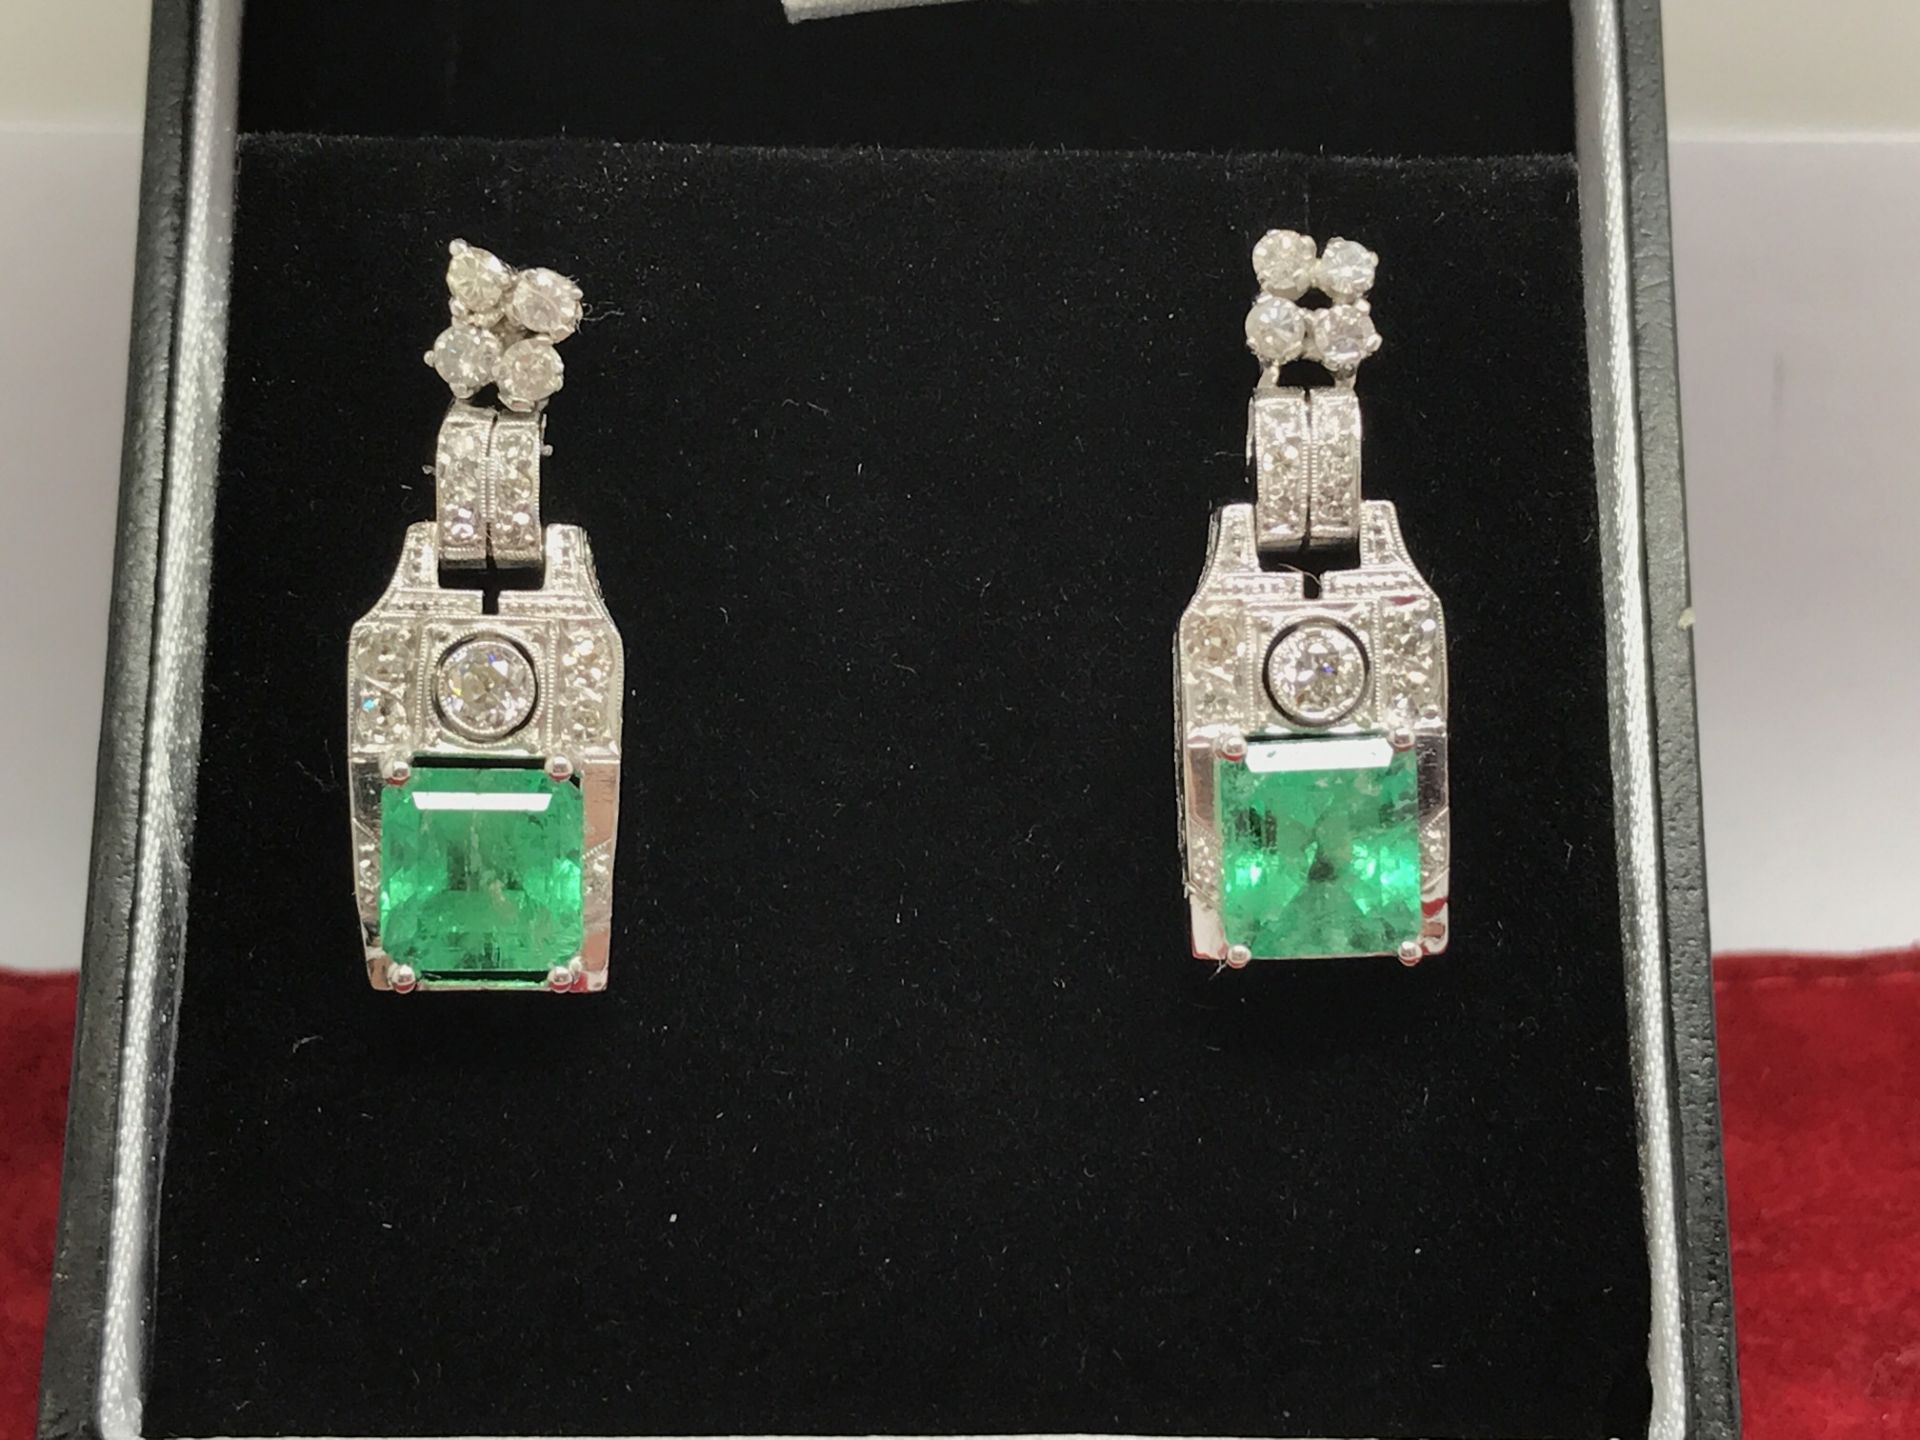 5.50cts COLOMBIAN EMERALD & DIAMOND EARRINGS SET IN WHITE METAL TESTED AS PLATINUM - Image 5 of 7